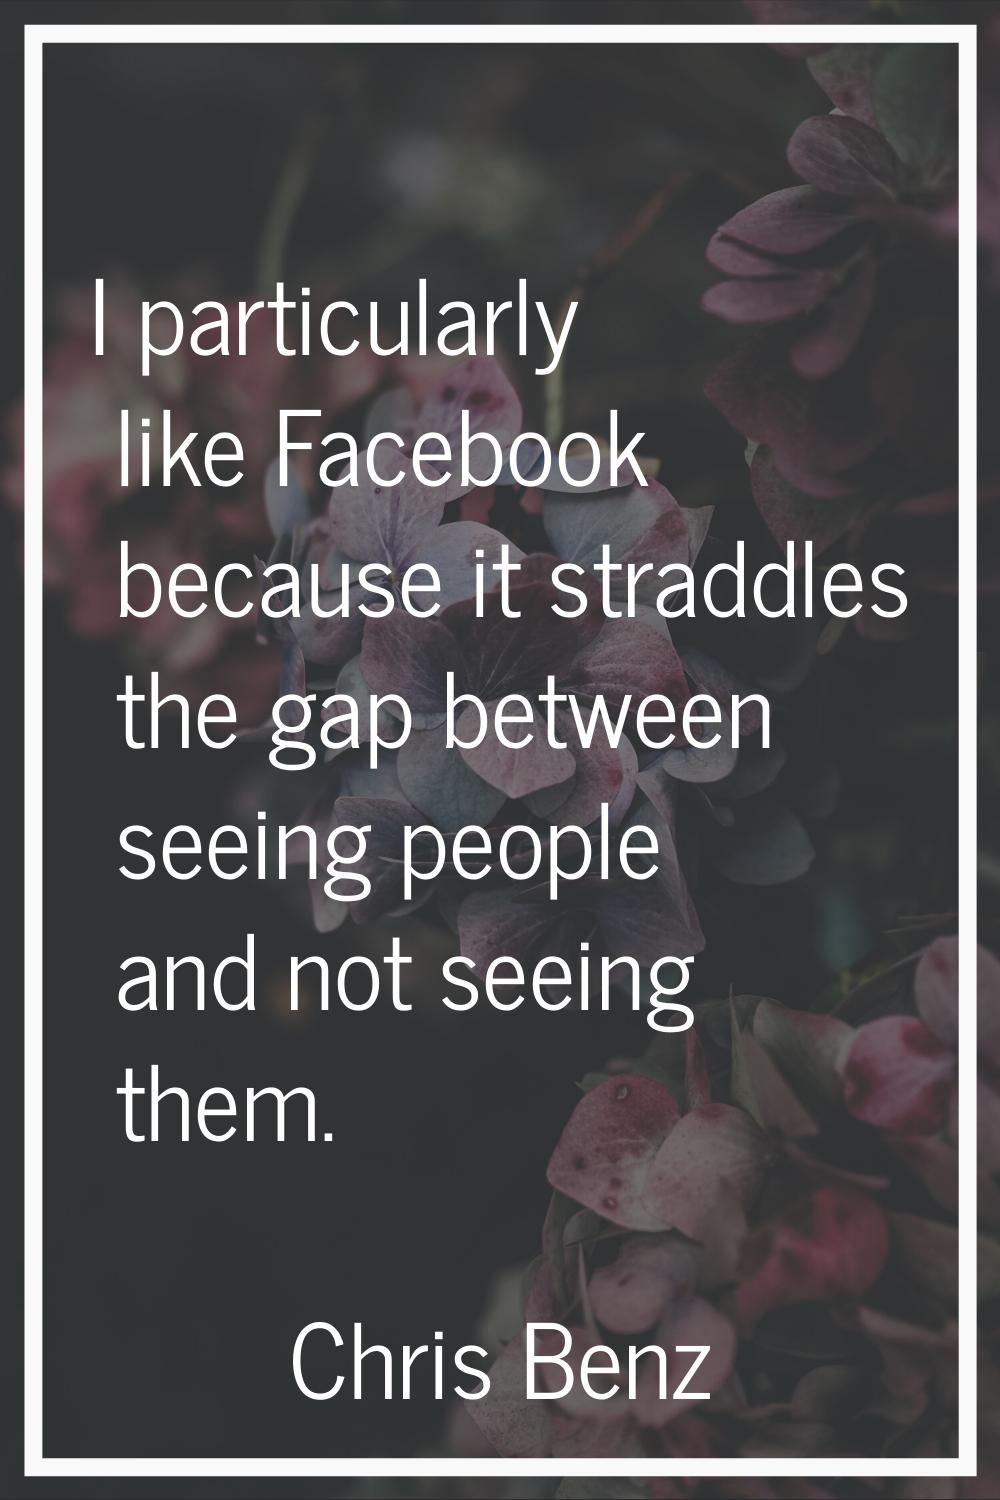 I particularly like Facebook because it straddles the gap between seeing people and not seeing them